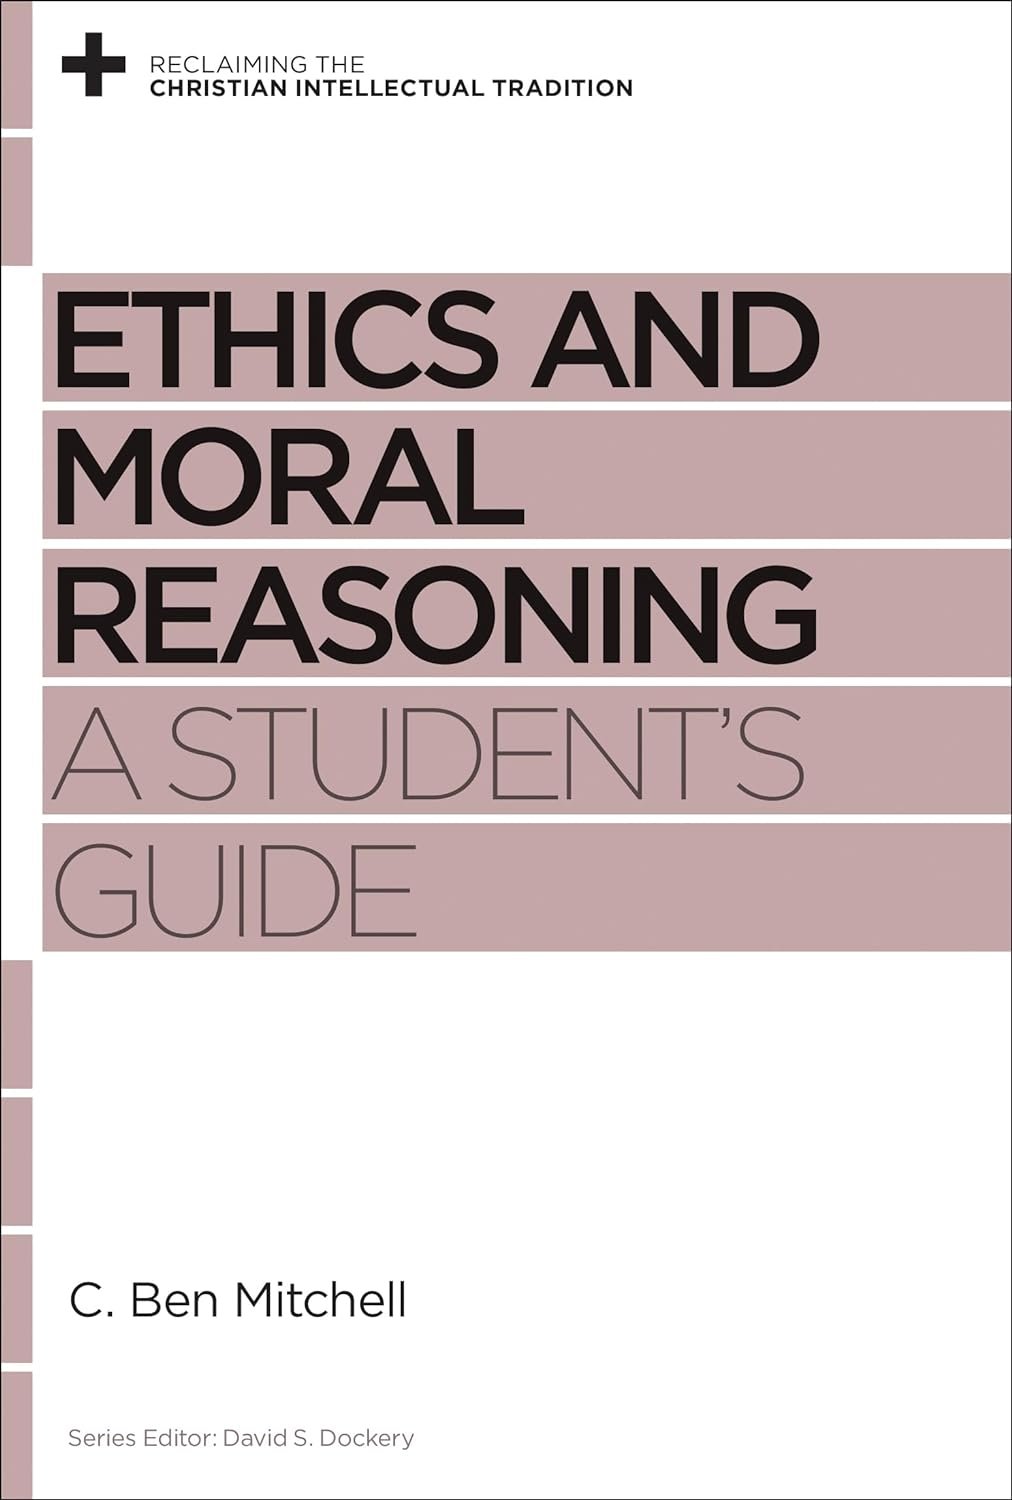 $5 - Ethics and Moral Reasoning